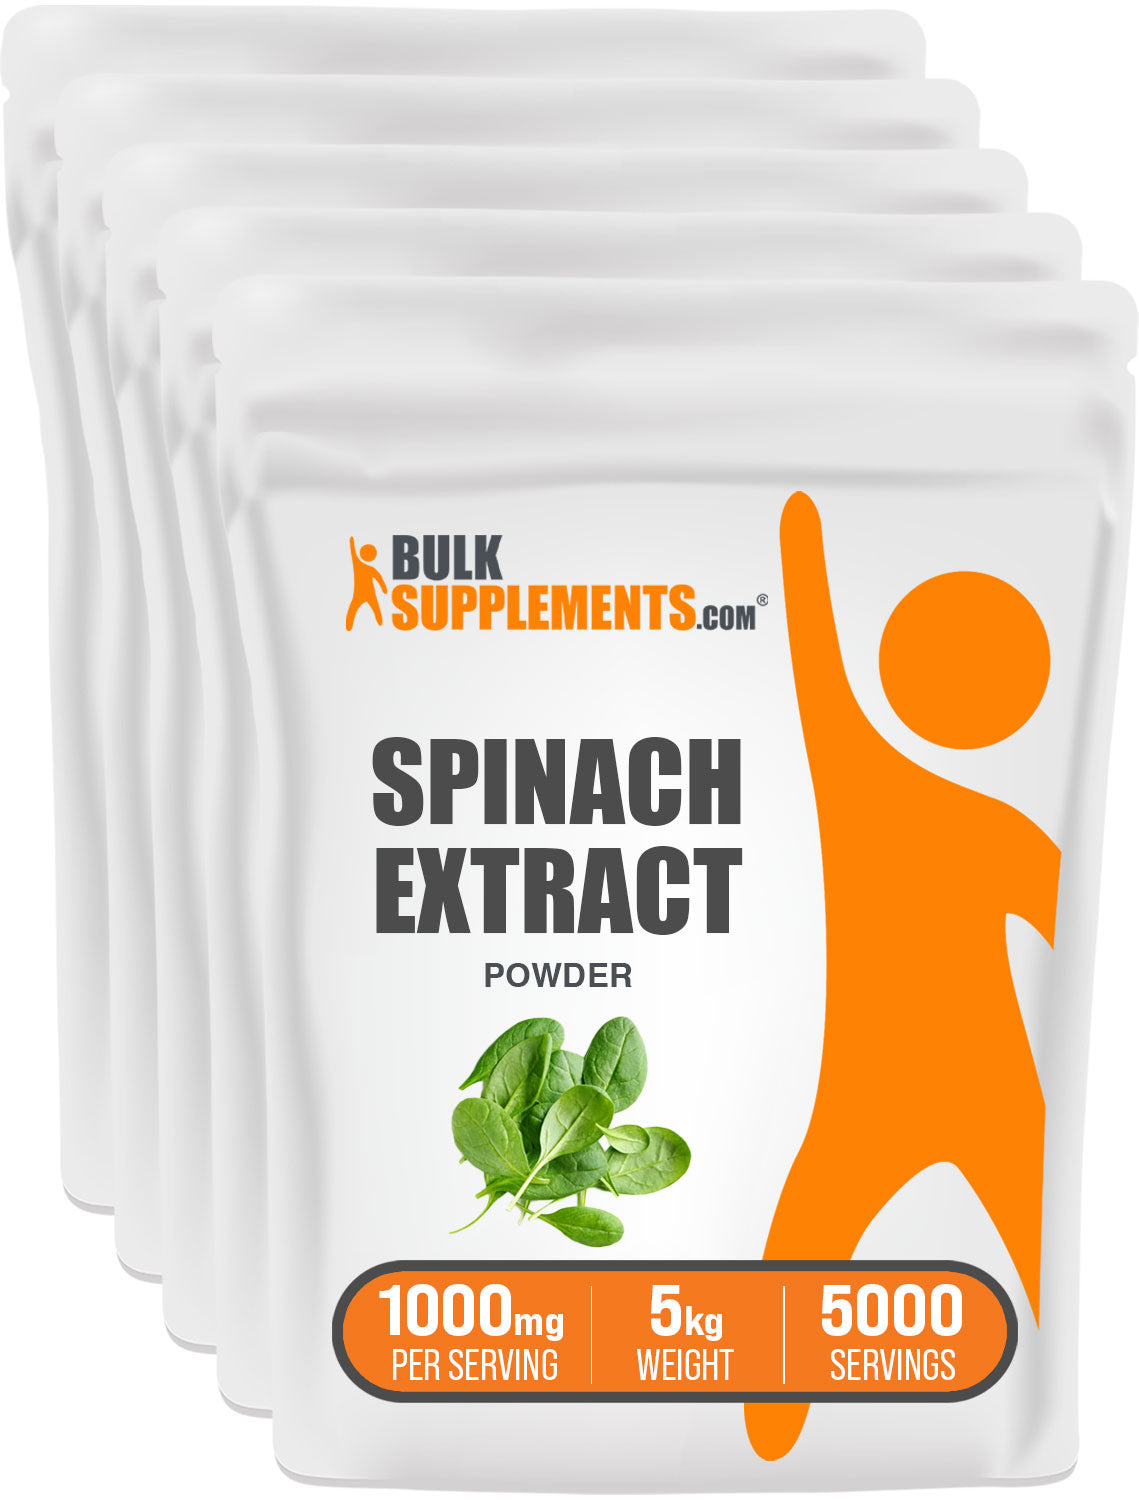 BulkSupplements Spinach Extract Powder 5kg bag